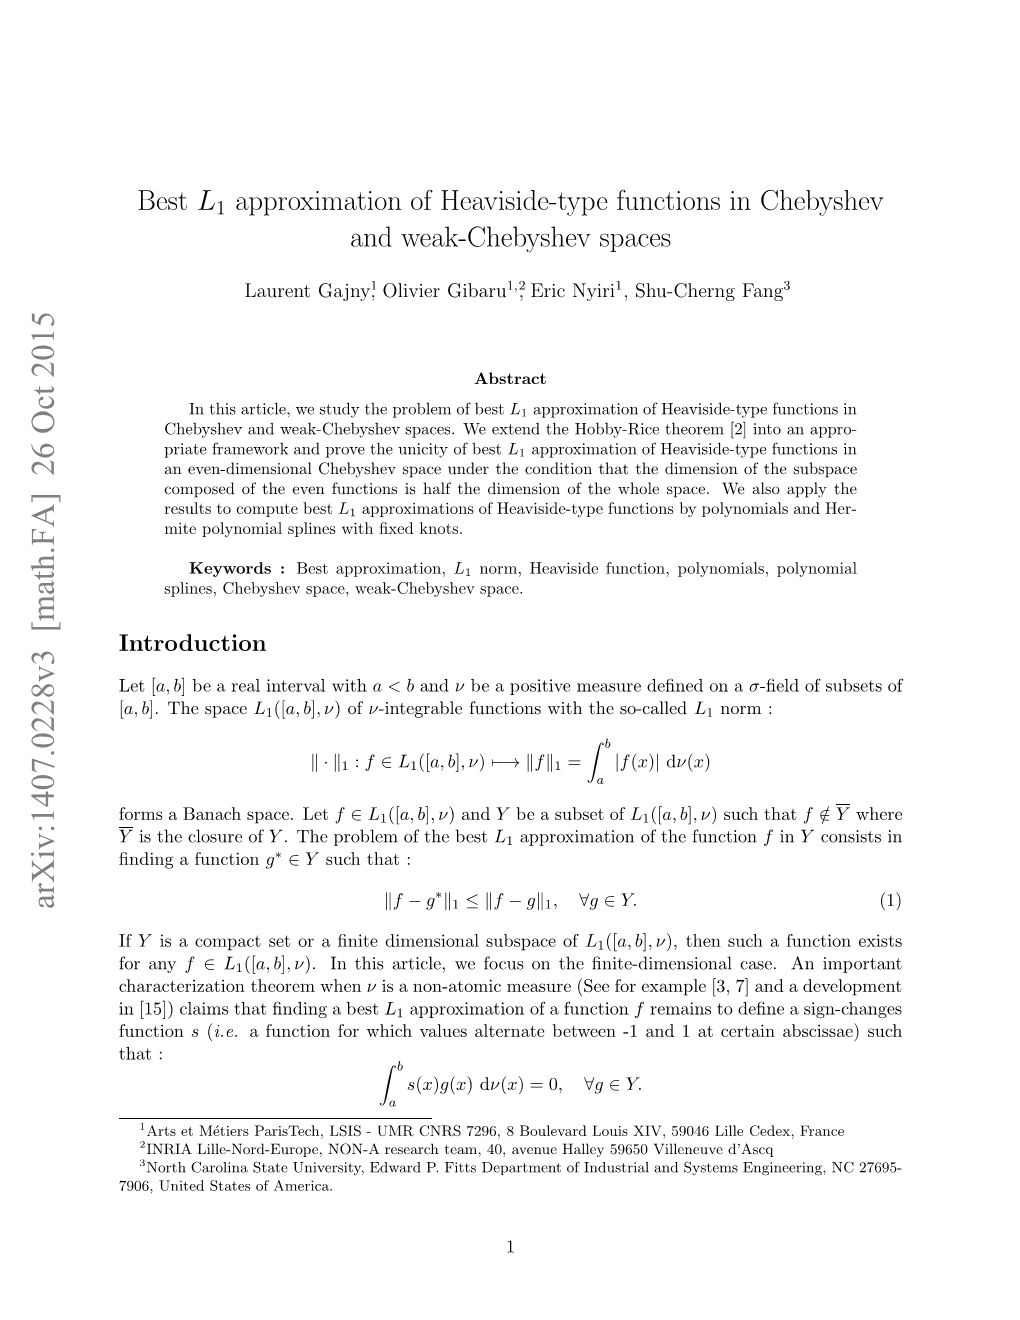 Best L1 Approximation of Heaviside-Type Functions in a Weak-Chebyshev Space